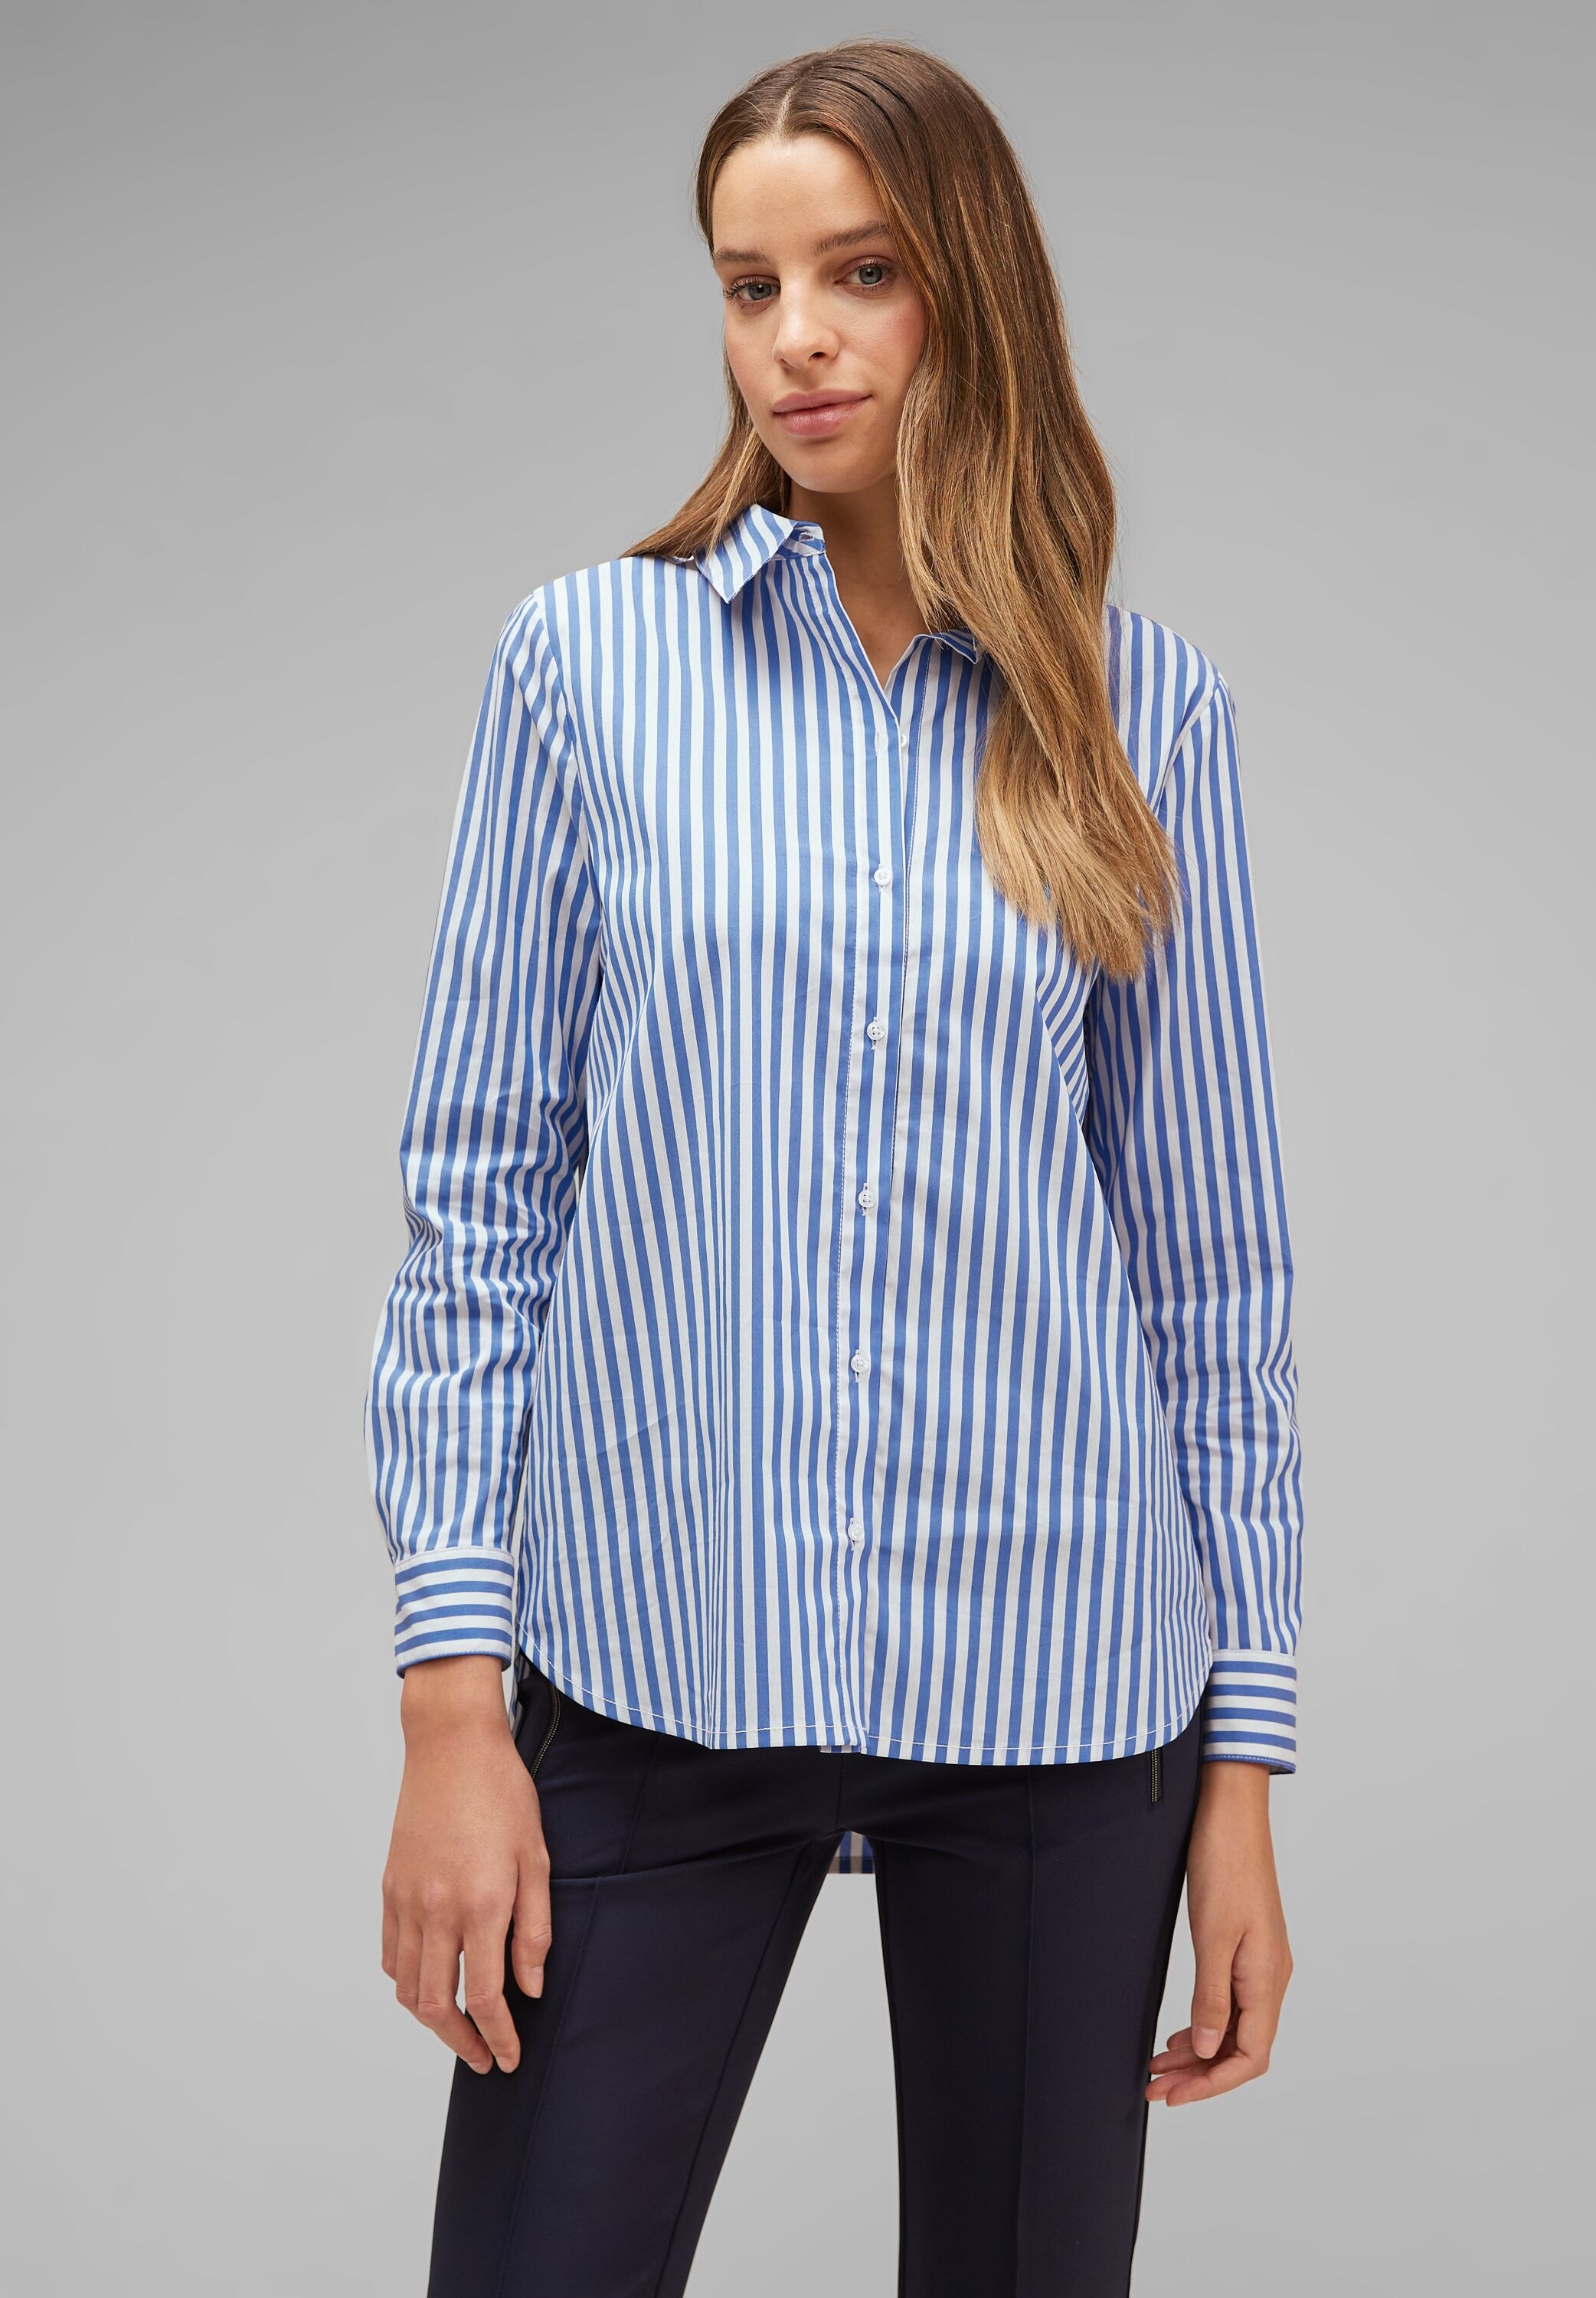 STREET ONE Longbluse »Striped Office Blouse«, mit Streifenmuster